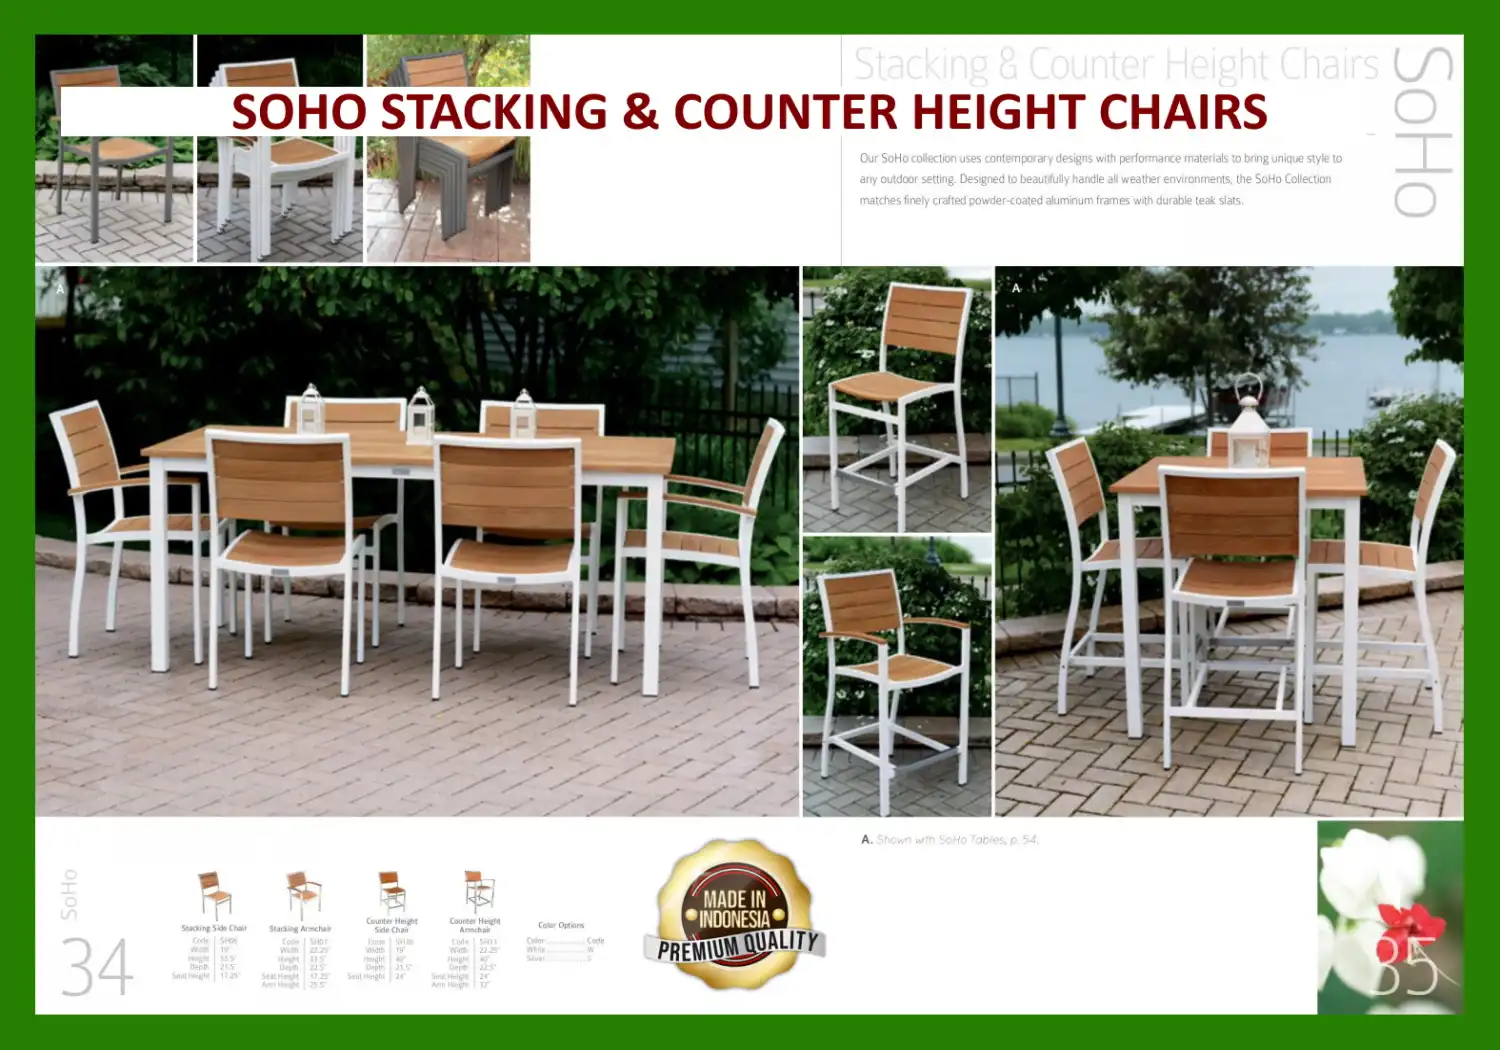 SOHO STACKING & COUNTER HEIGHT CHAIRS